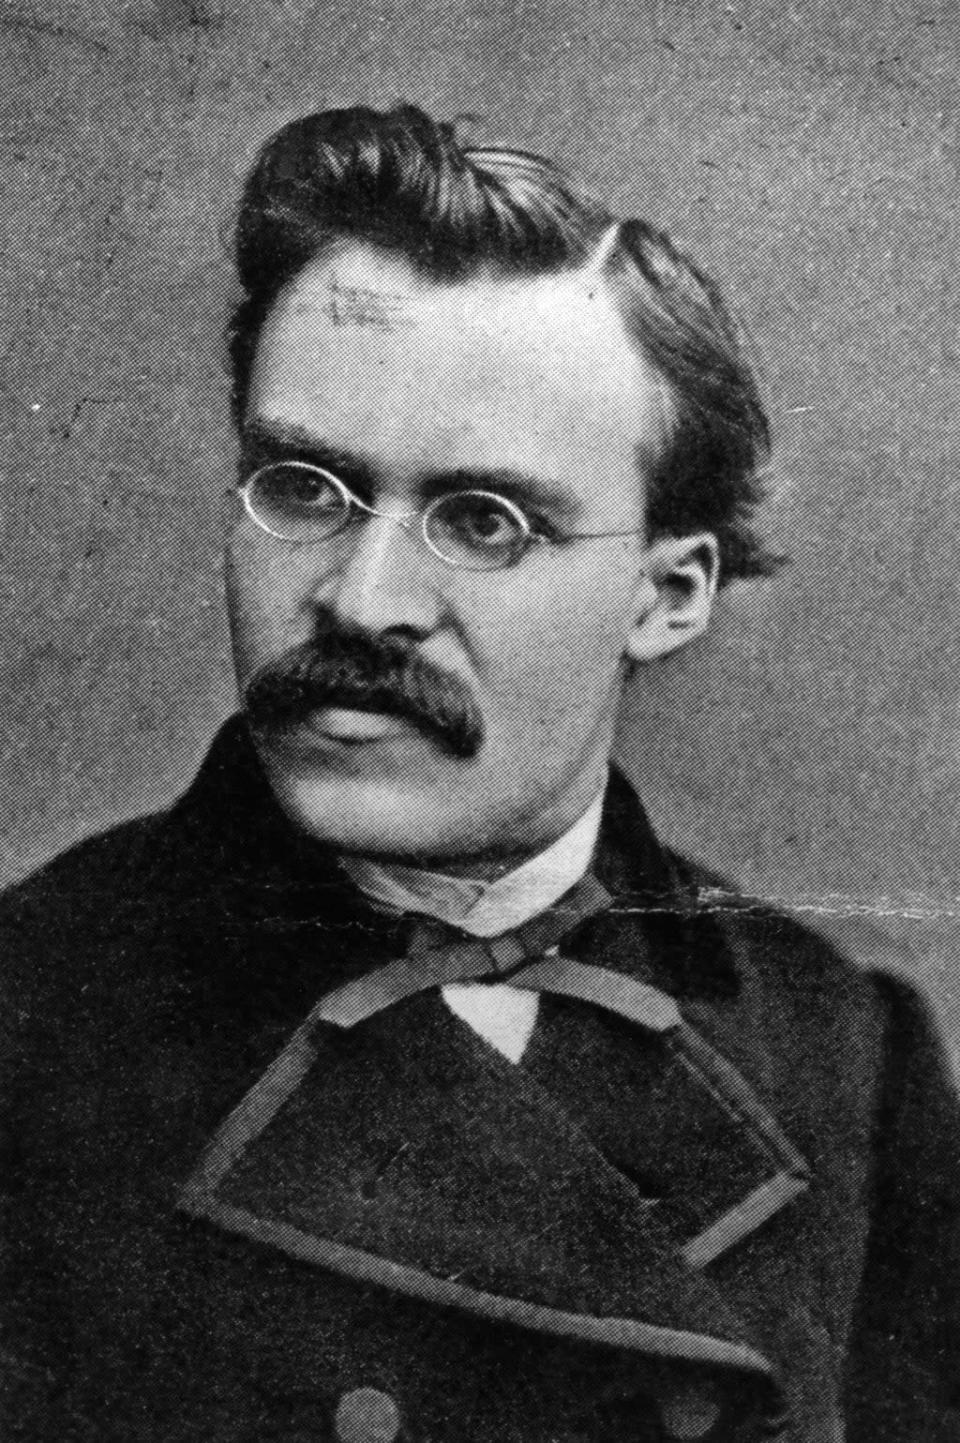 Nietzsche&#x002019;s works include &#x002018;Beyond Good and Evil&#x002019; and &#x002018;Thus Spoke Zarathustra&#x002019; (Getty)